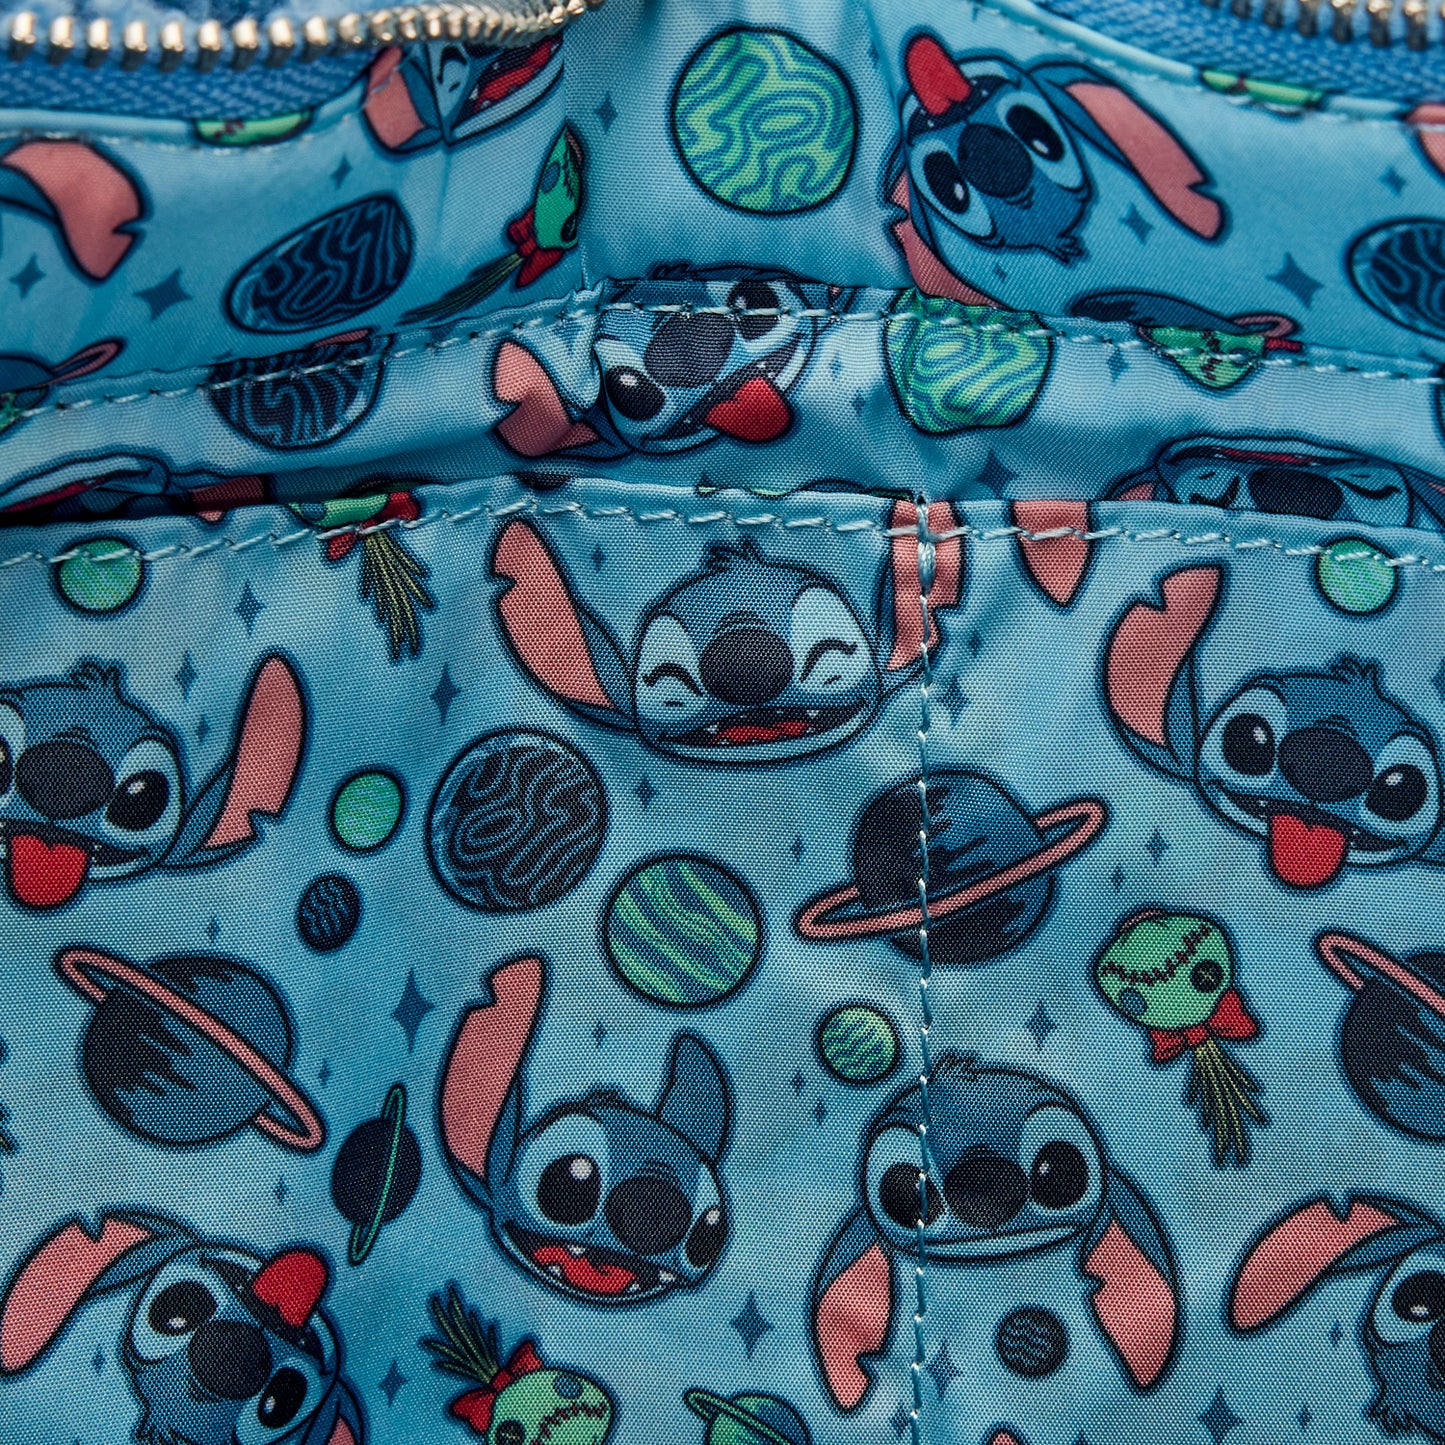 Stitch Plush Tote Bag with Coin Bag